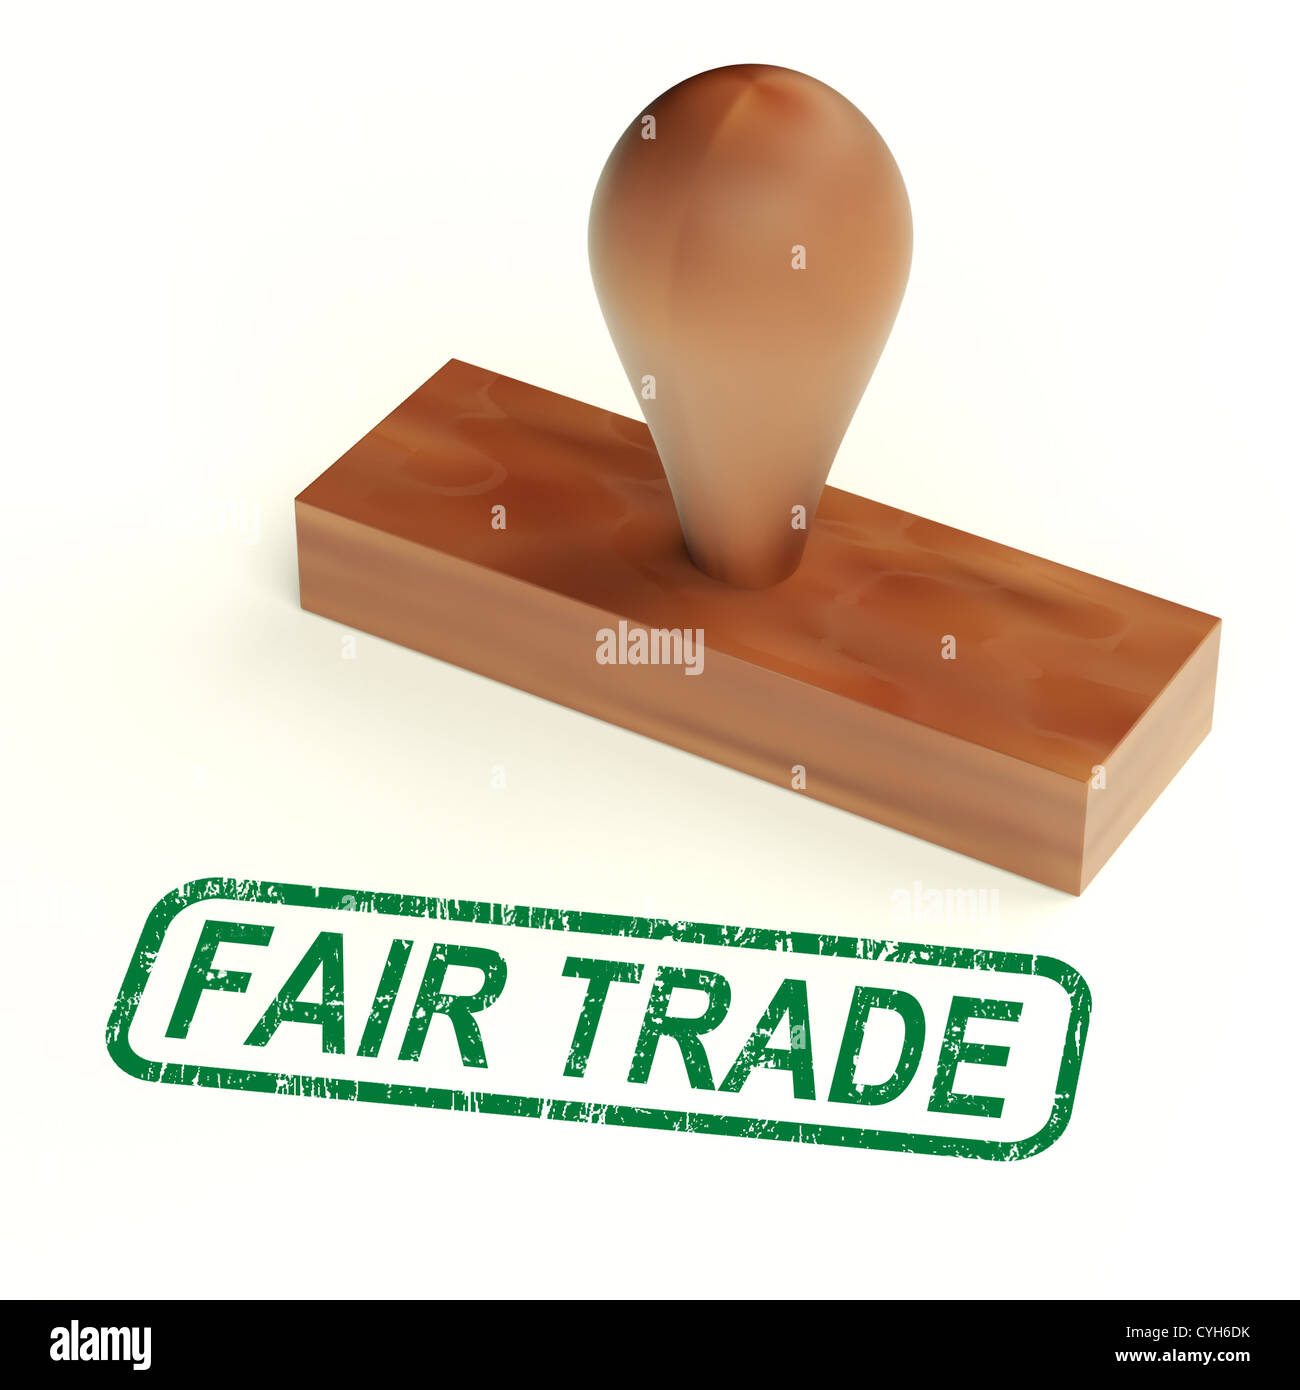 Fair Trade Rubber Stamp Showing Ethical Products Stock Photo